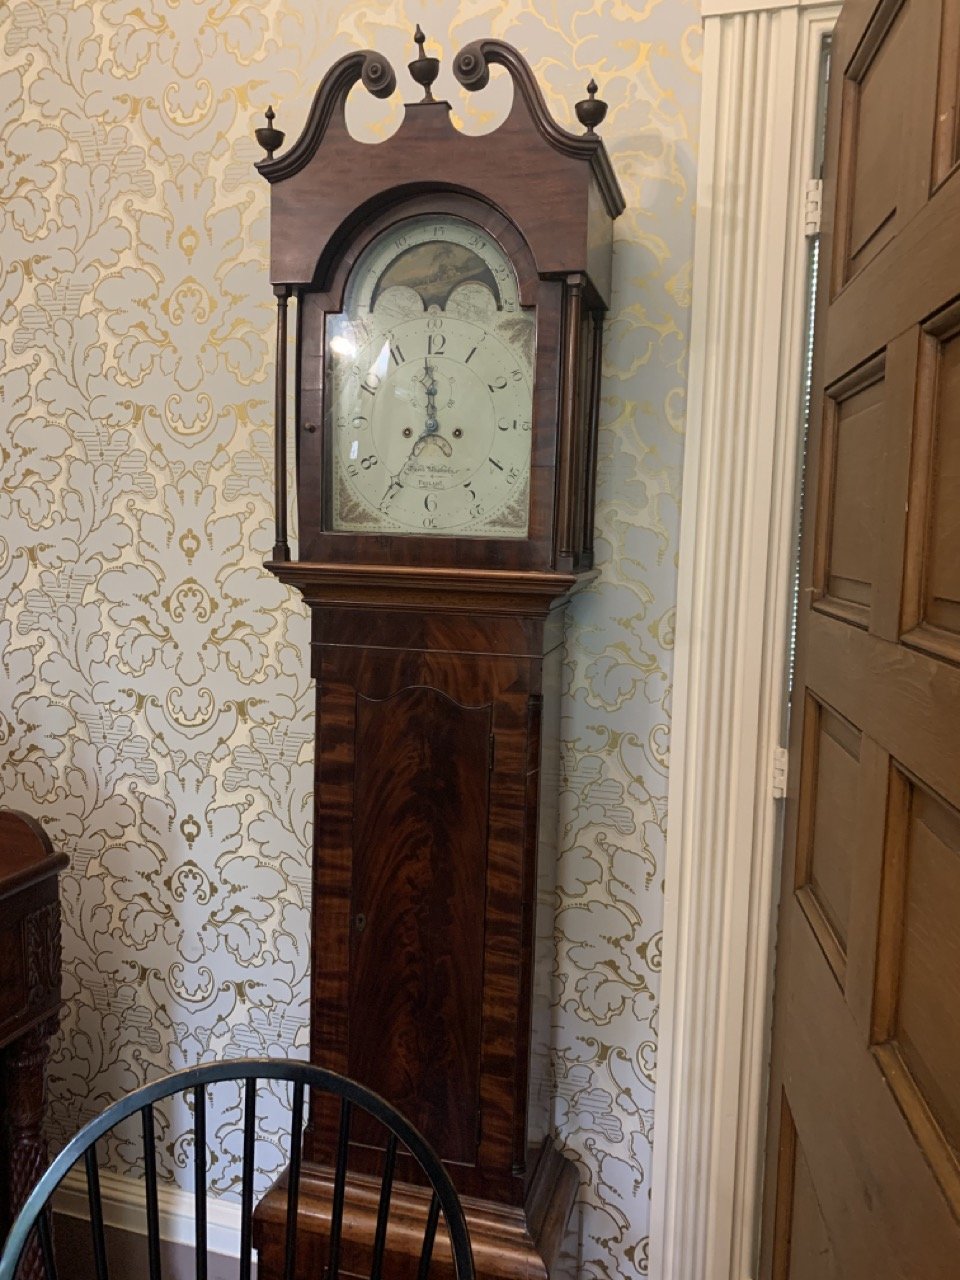 Grandfather clock in the parlor